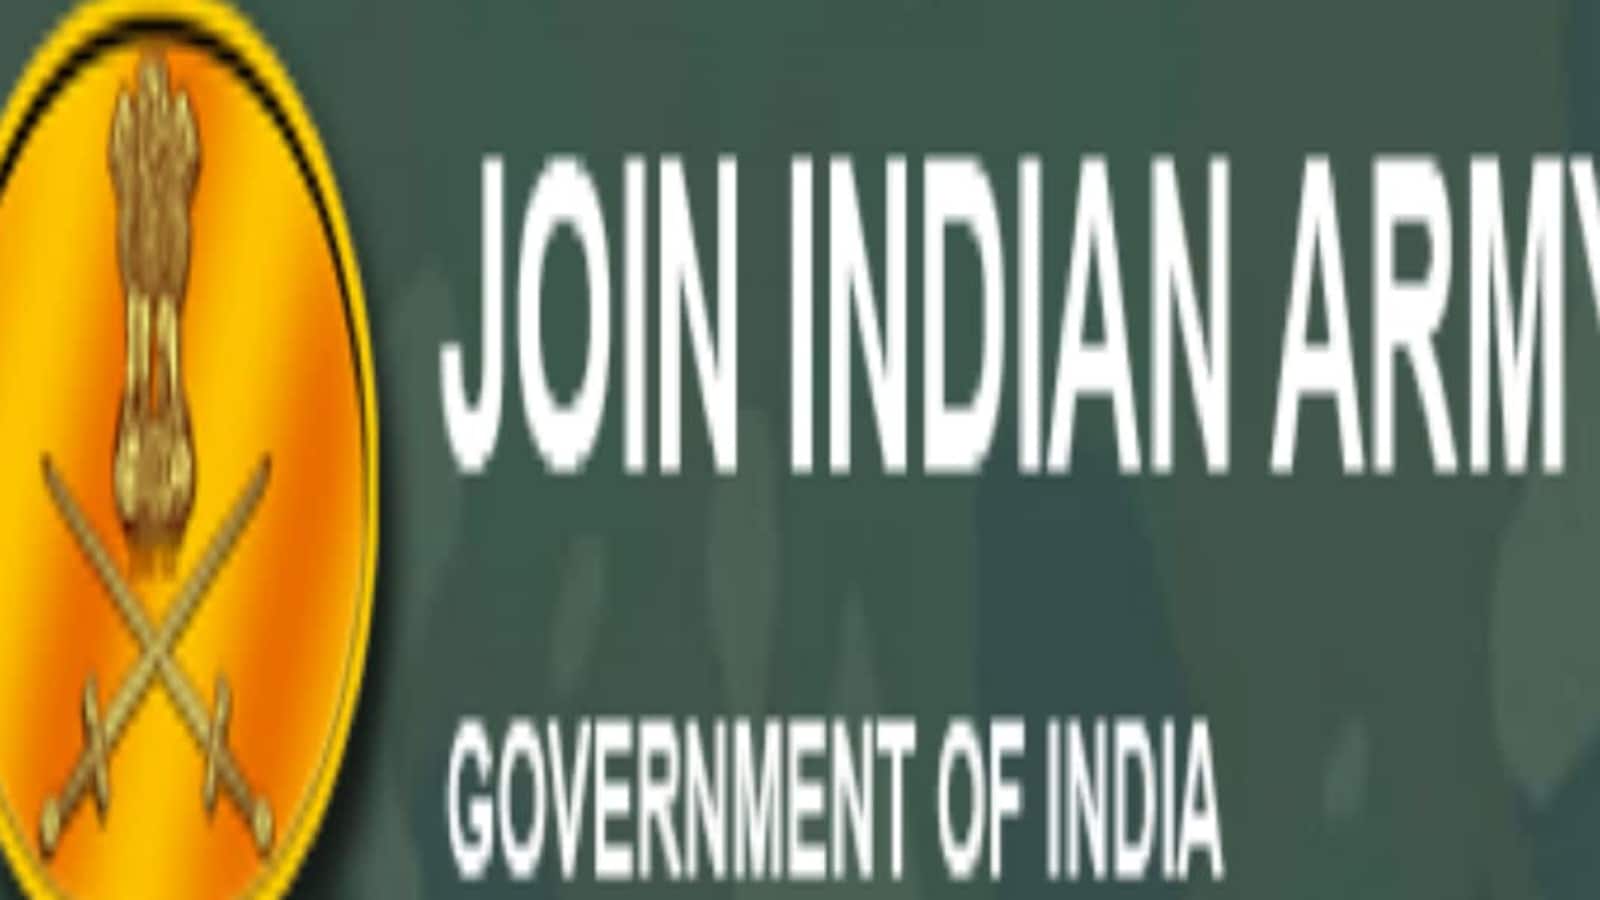 Join Indian Army 2021: Apply for Officer posts on jointerritorialarmy.gov.in